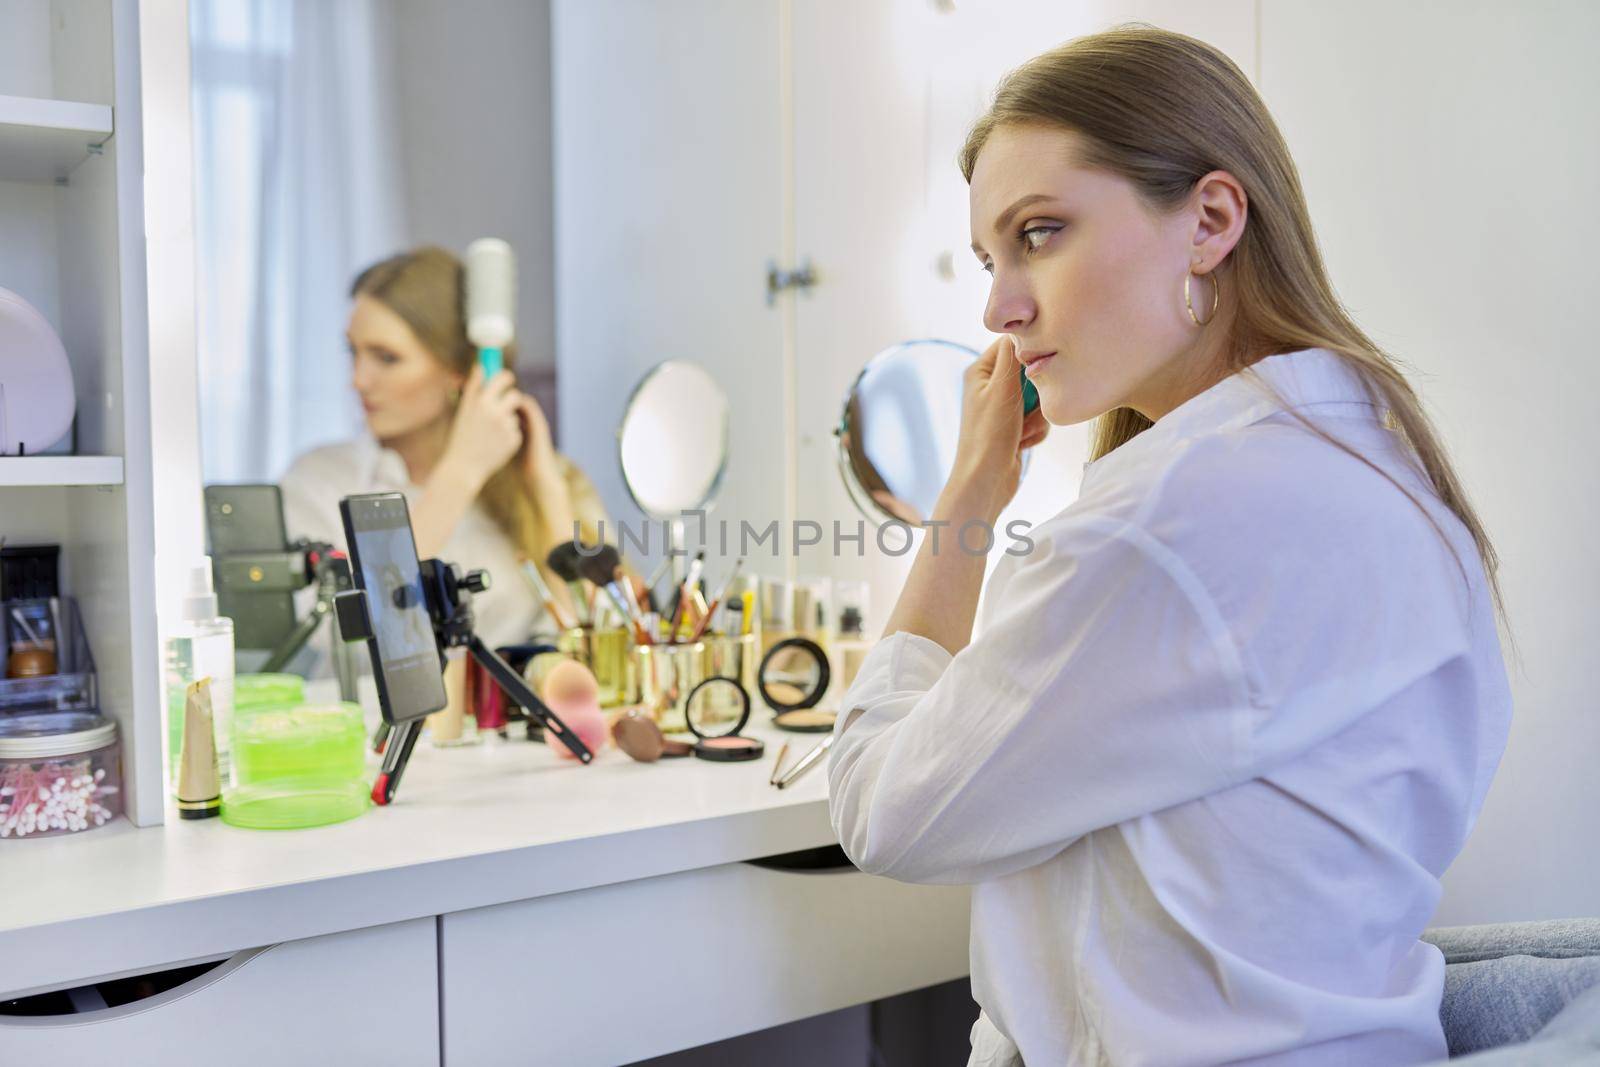 Beauty blog, young woman sitting at make-up table with mirror doing makeup hairstyle, styling her hair with brush, blonde female beauty blogger recording blog vlog on smartphone, online master class